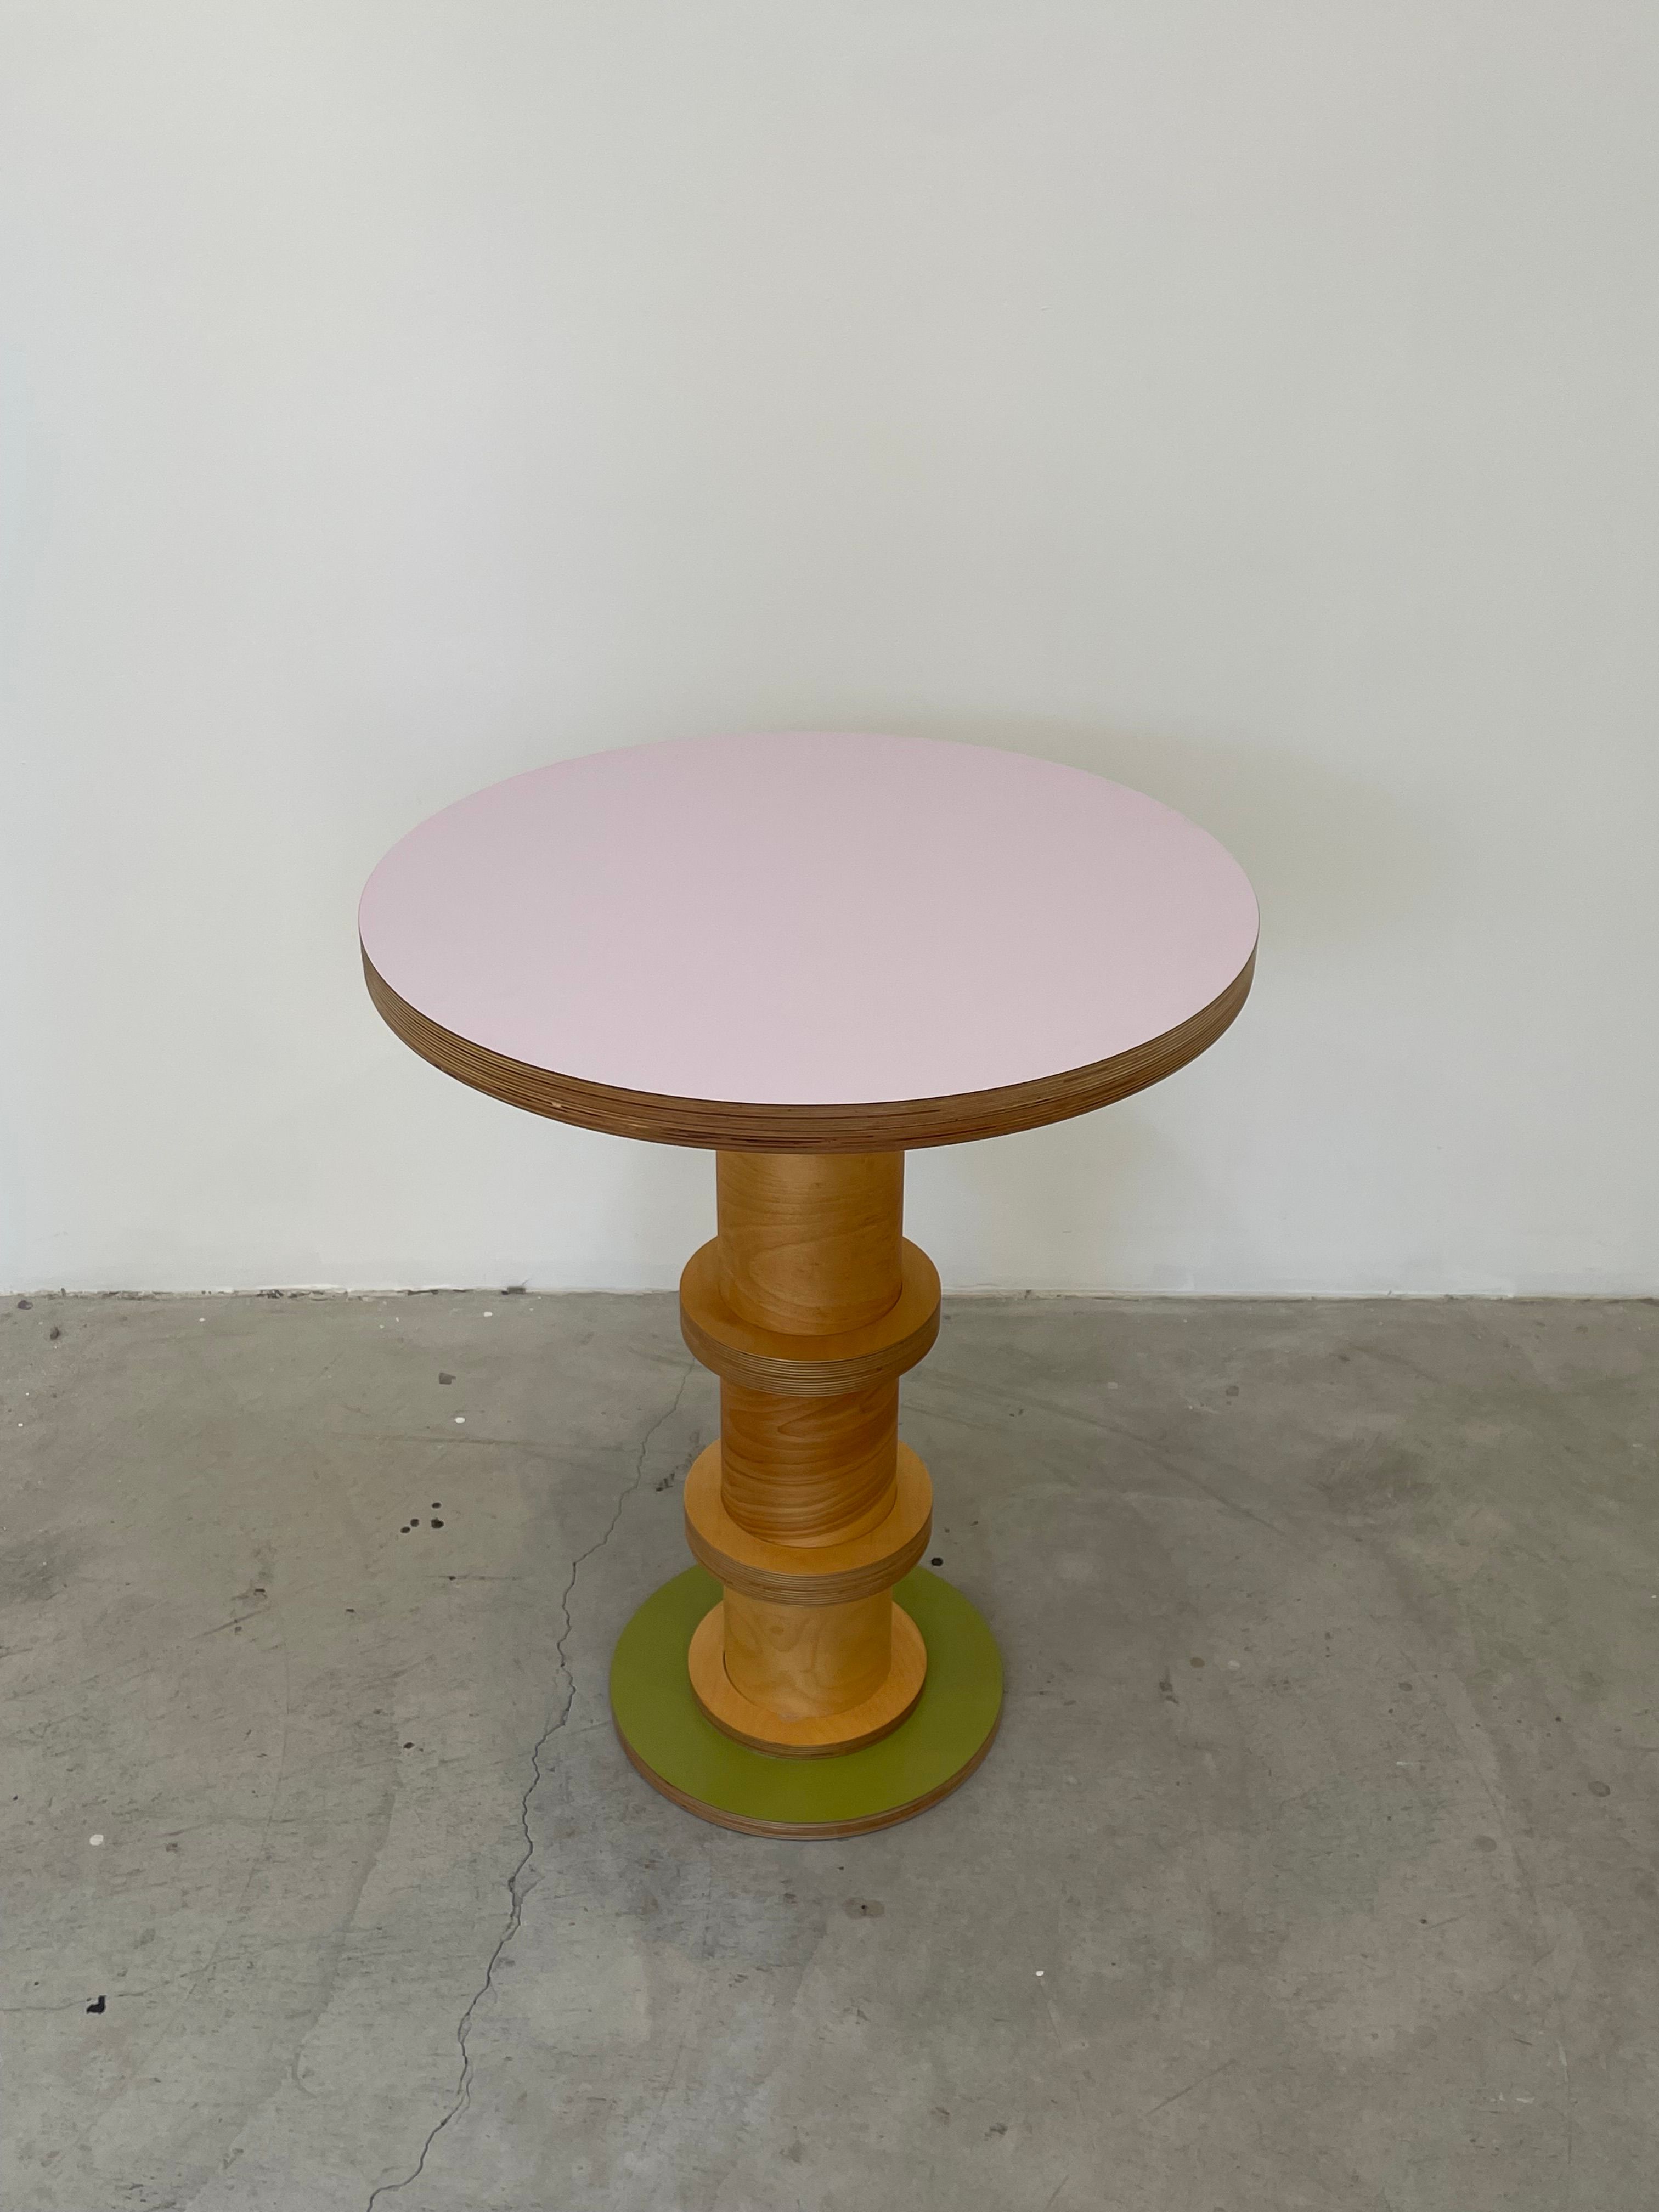  Round Column Table - Braindead Fabrications Gallery Show product image 6